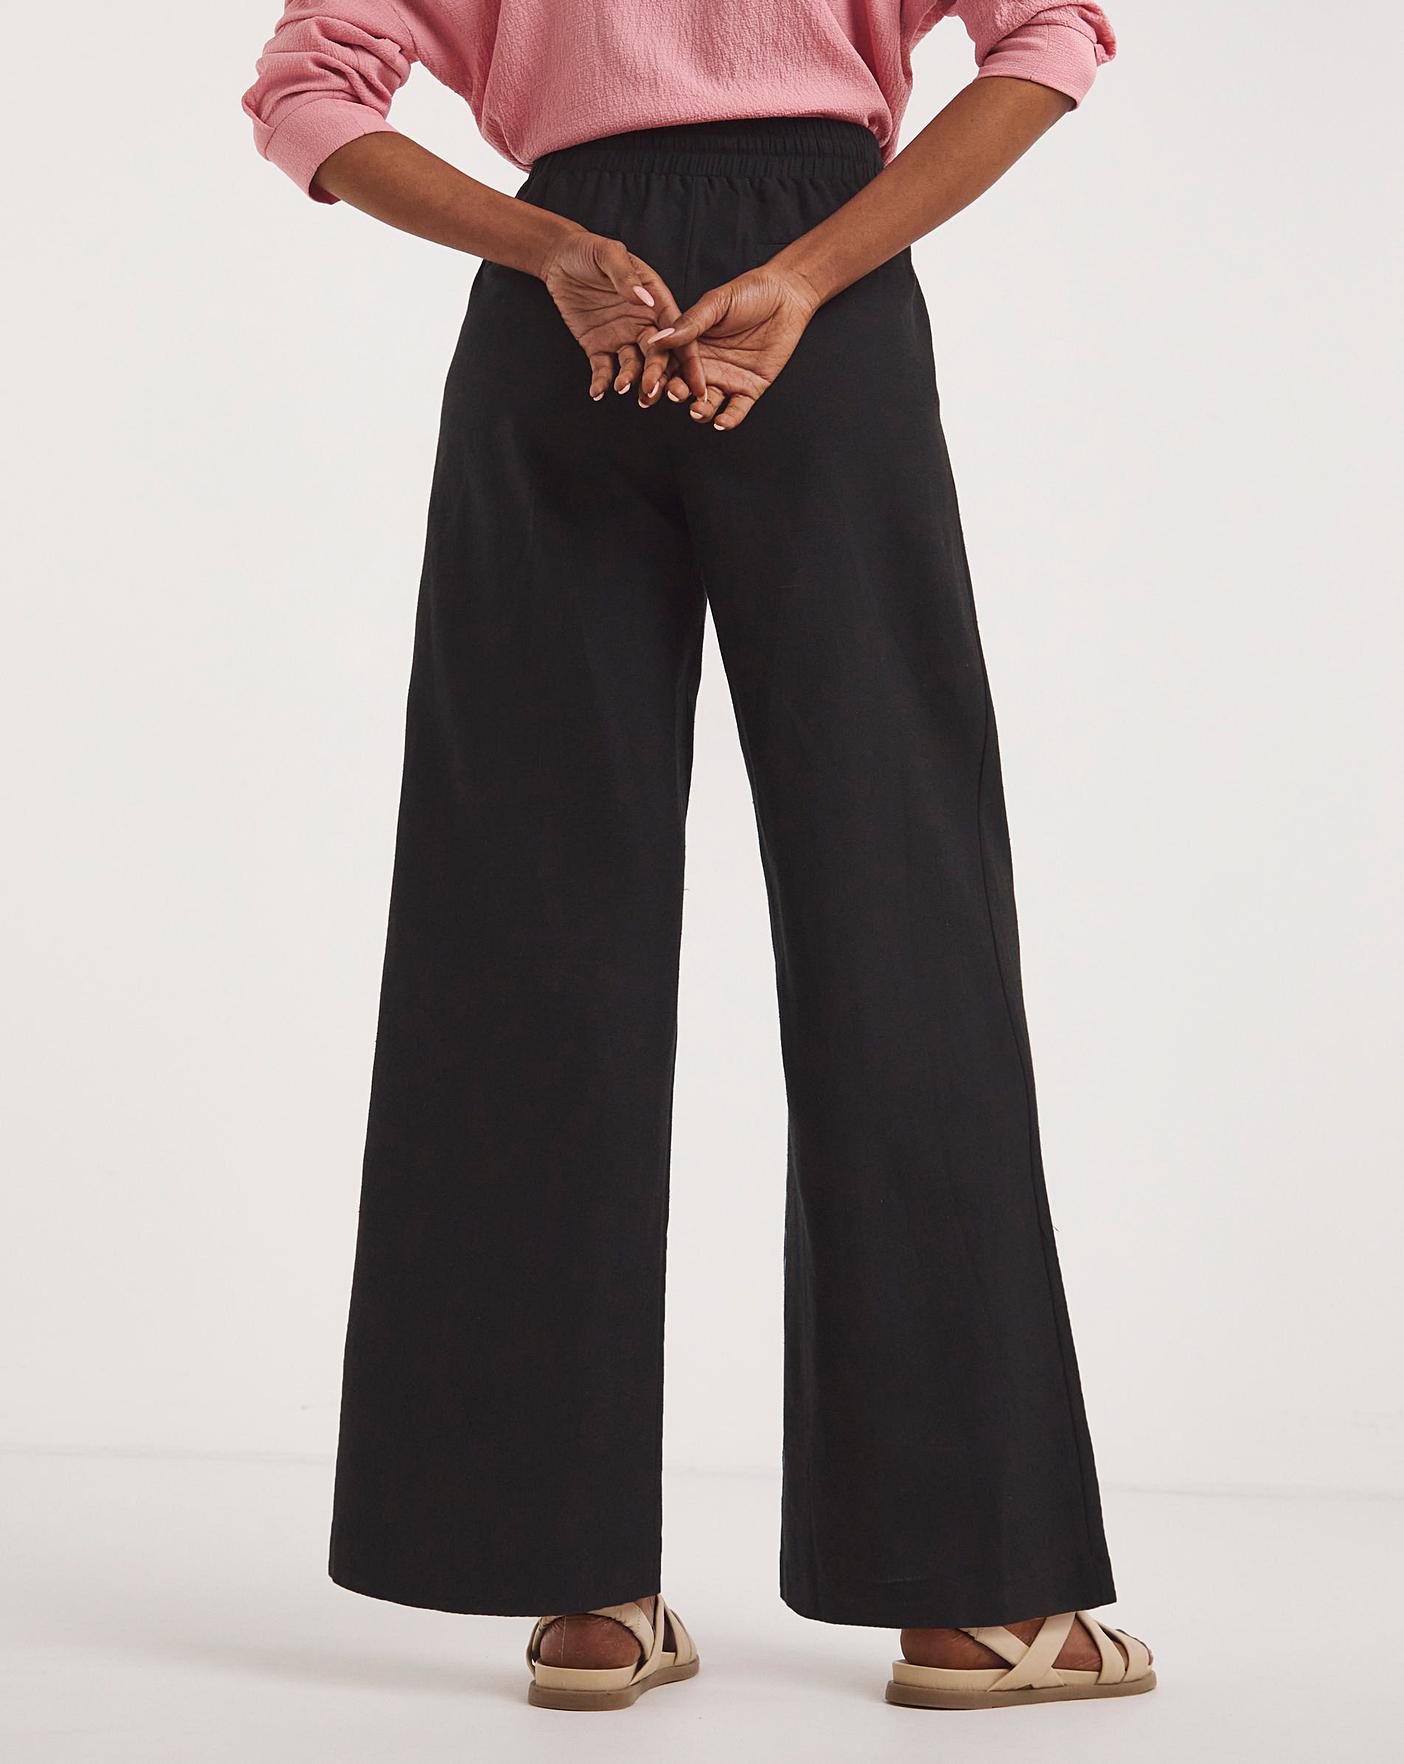 Shop Jd Williams Women's Camel Trousers up to 65% Off | DealDoodle